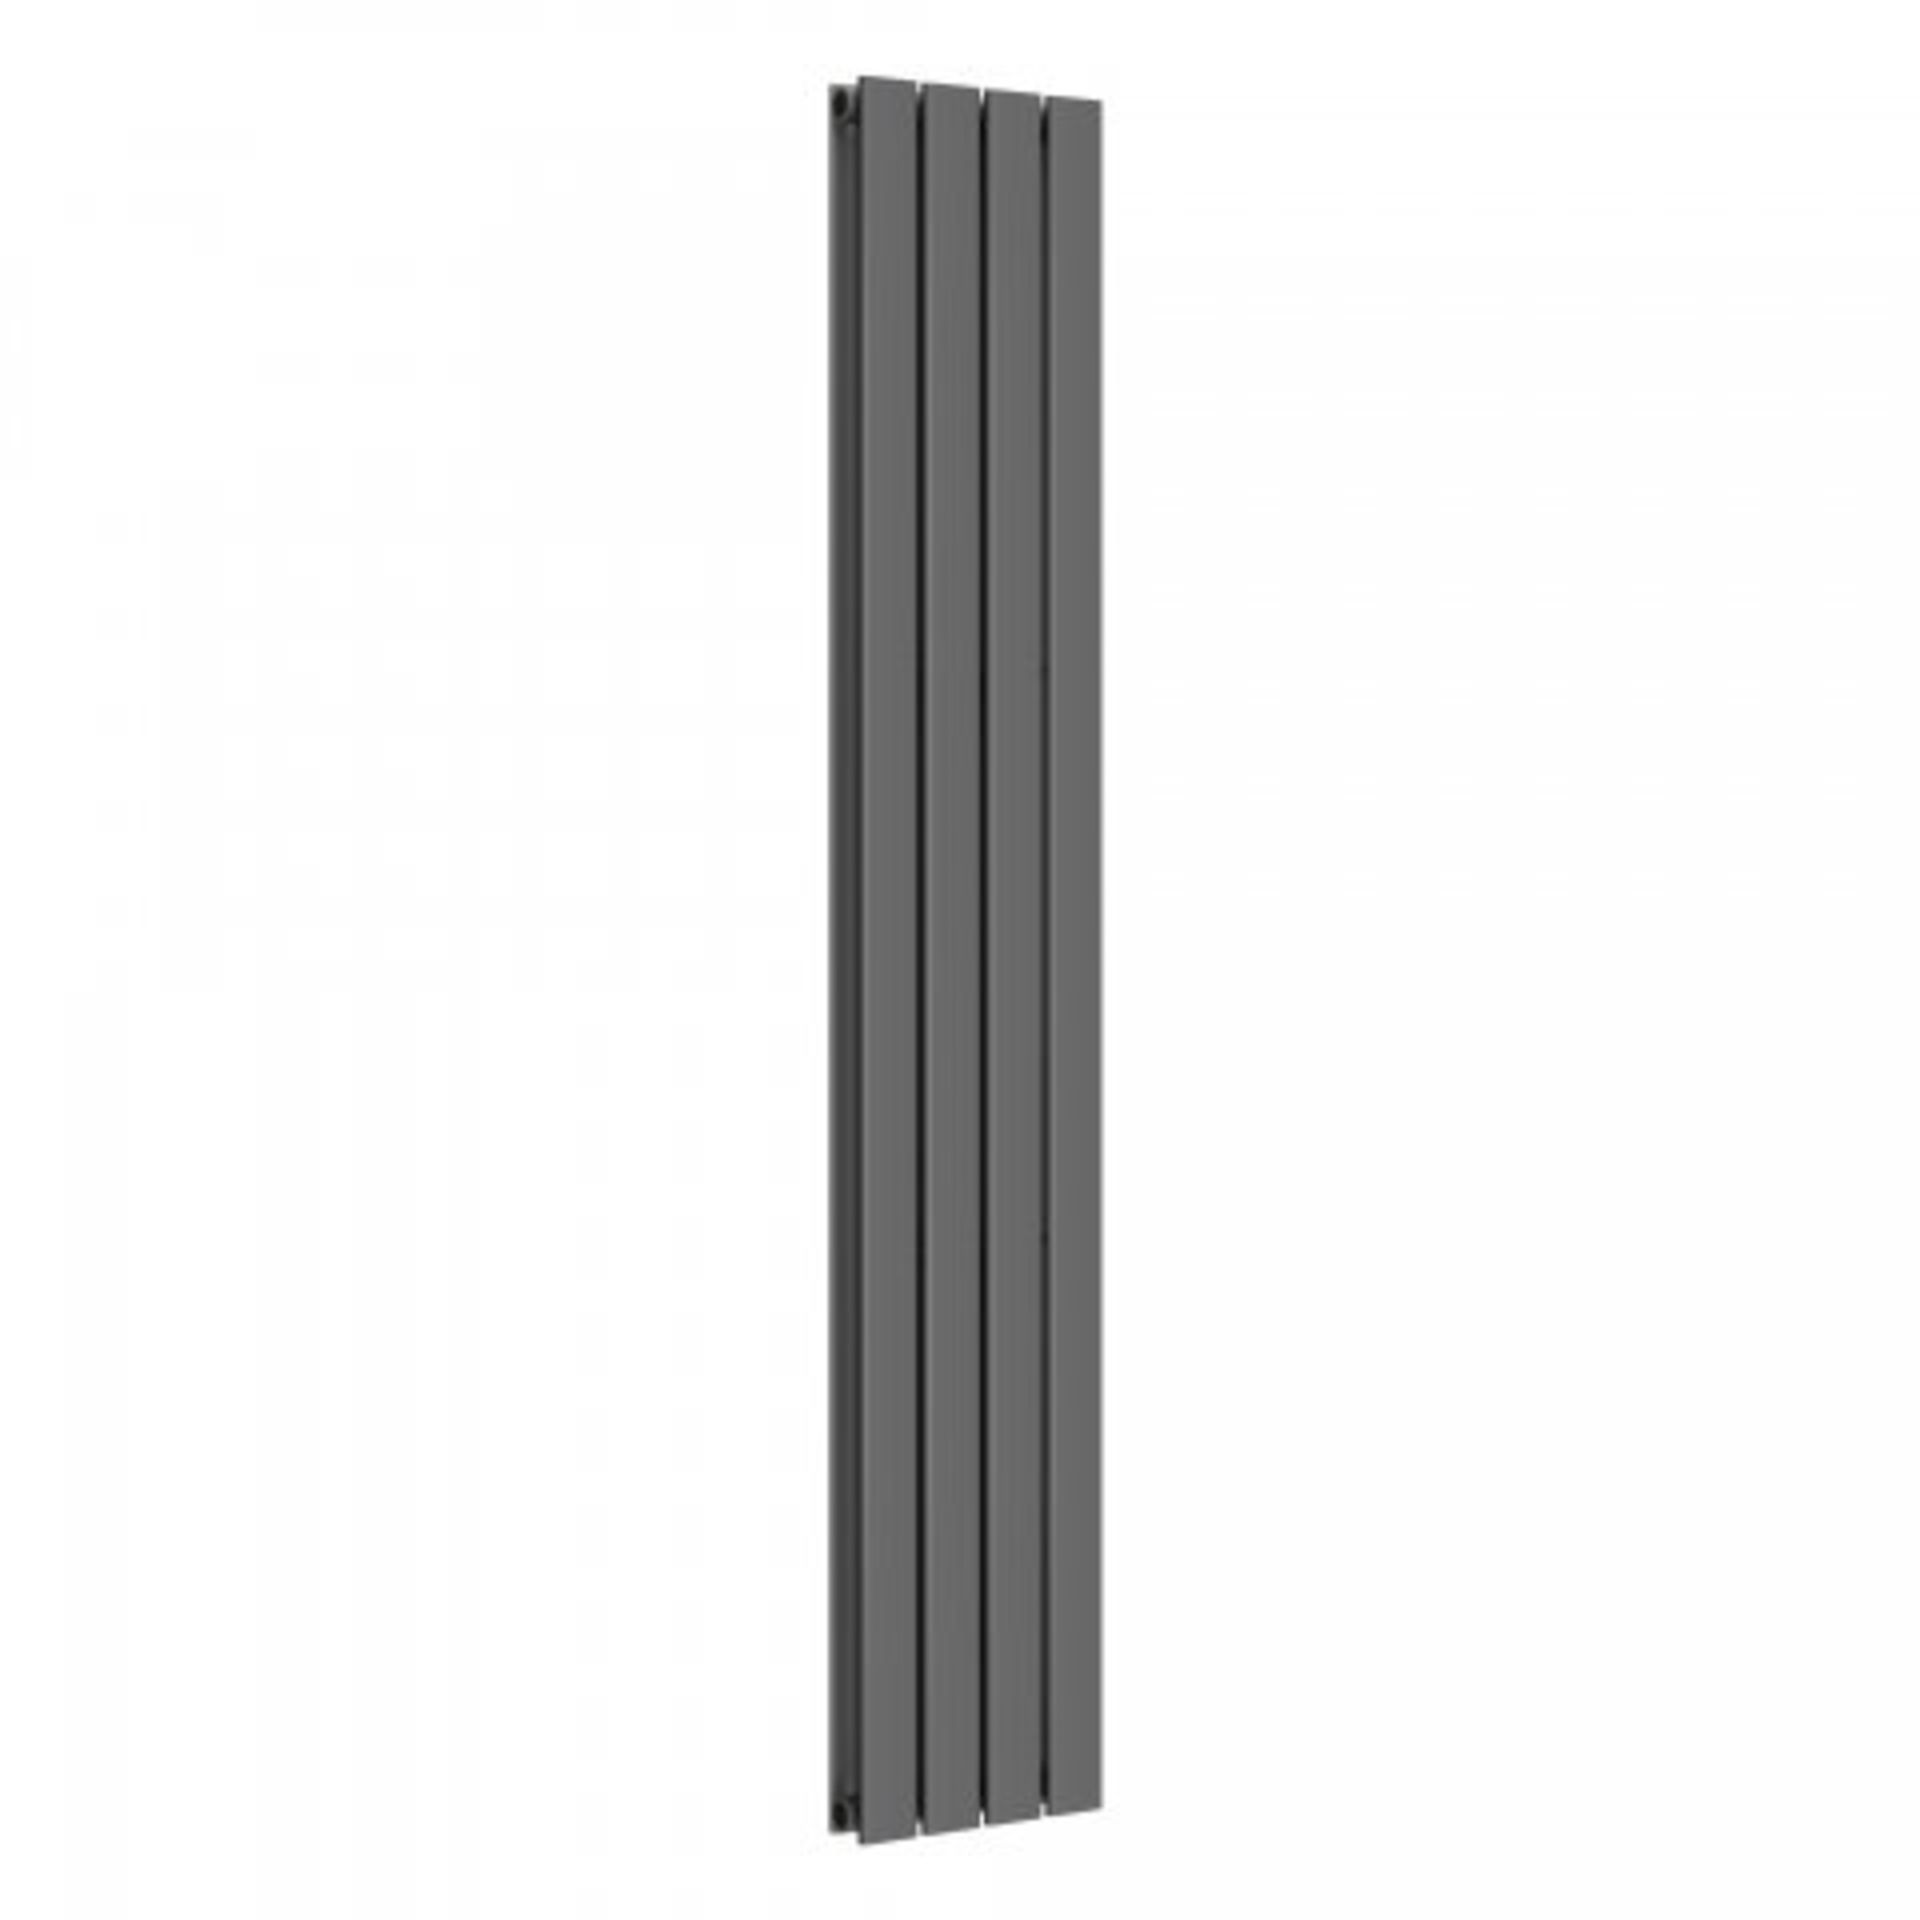 (REF4) 1800x300mm Anthracite Double Flat Panel Vertical Radiator - Thera Range. RRP £399.99. Our - Image 2 of 3